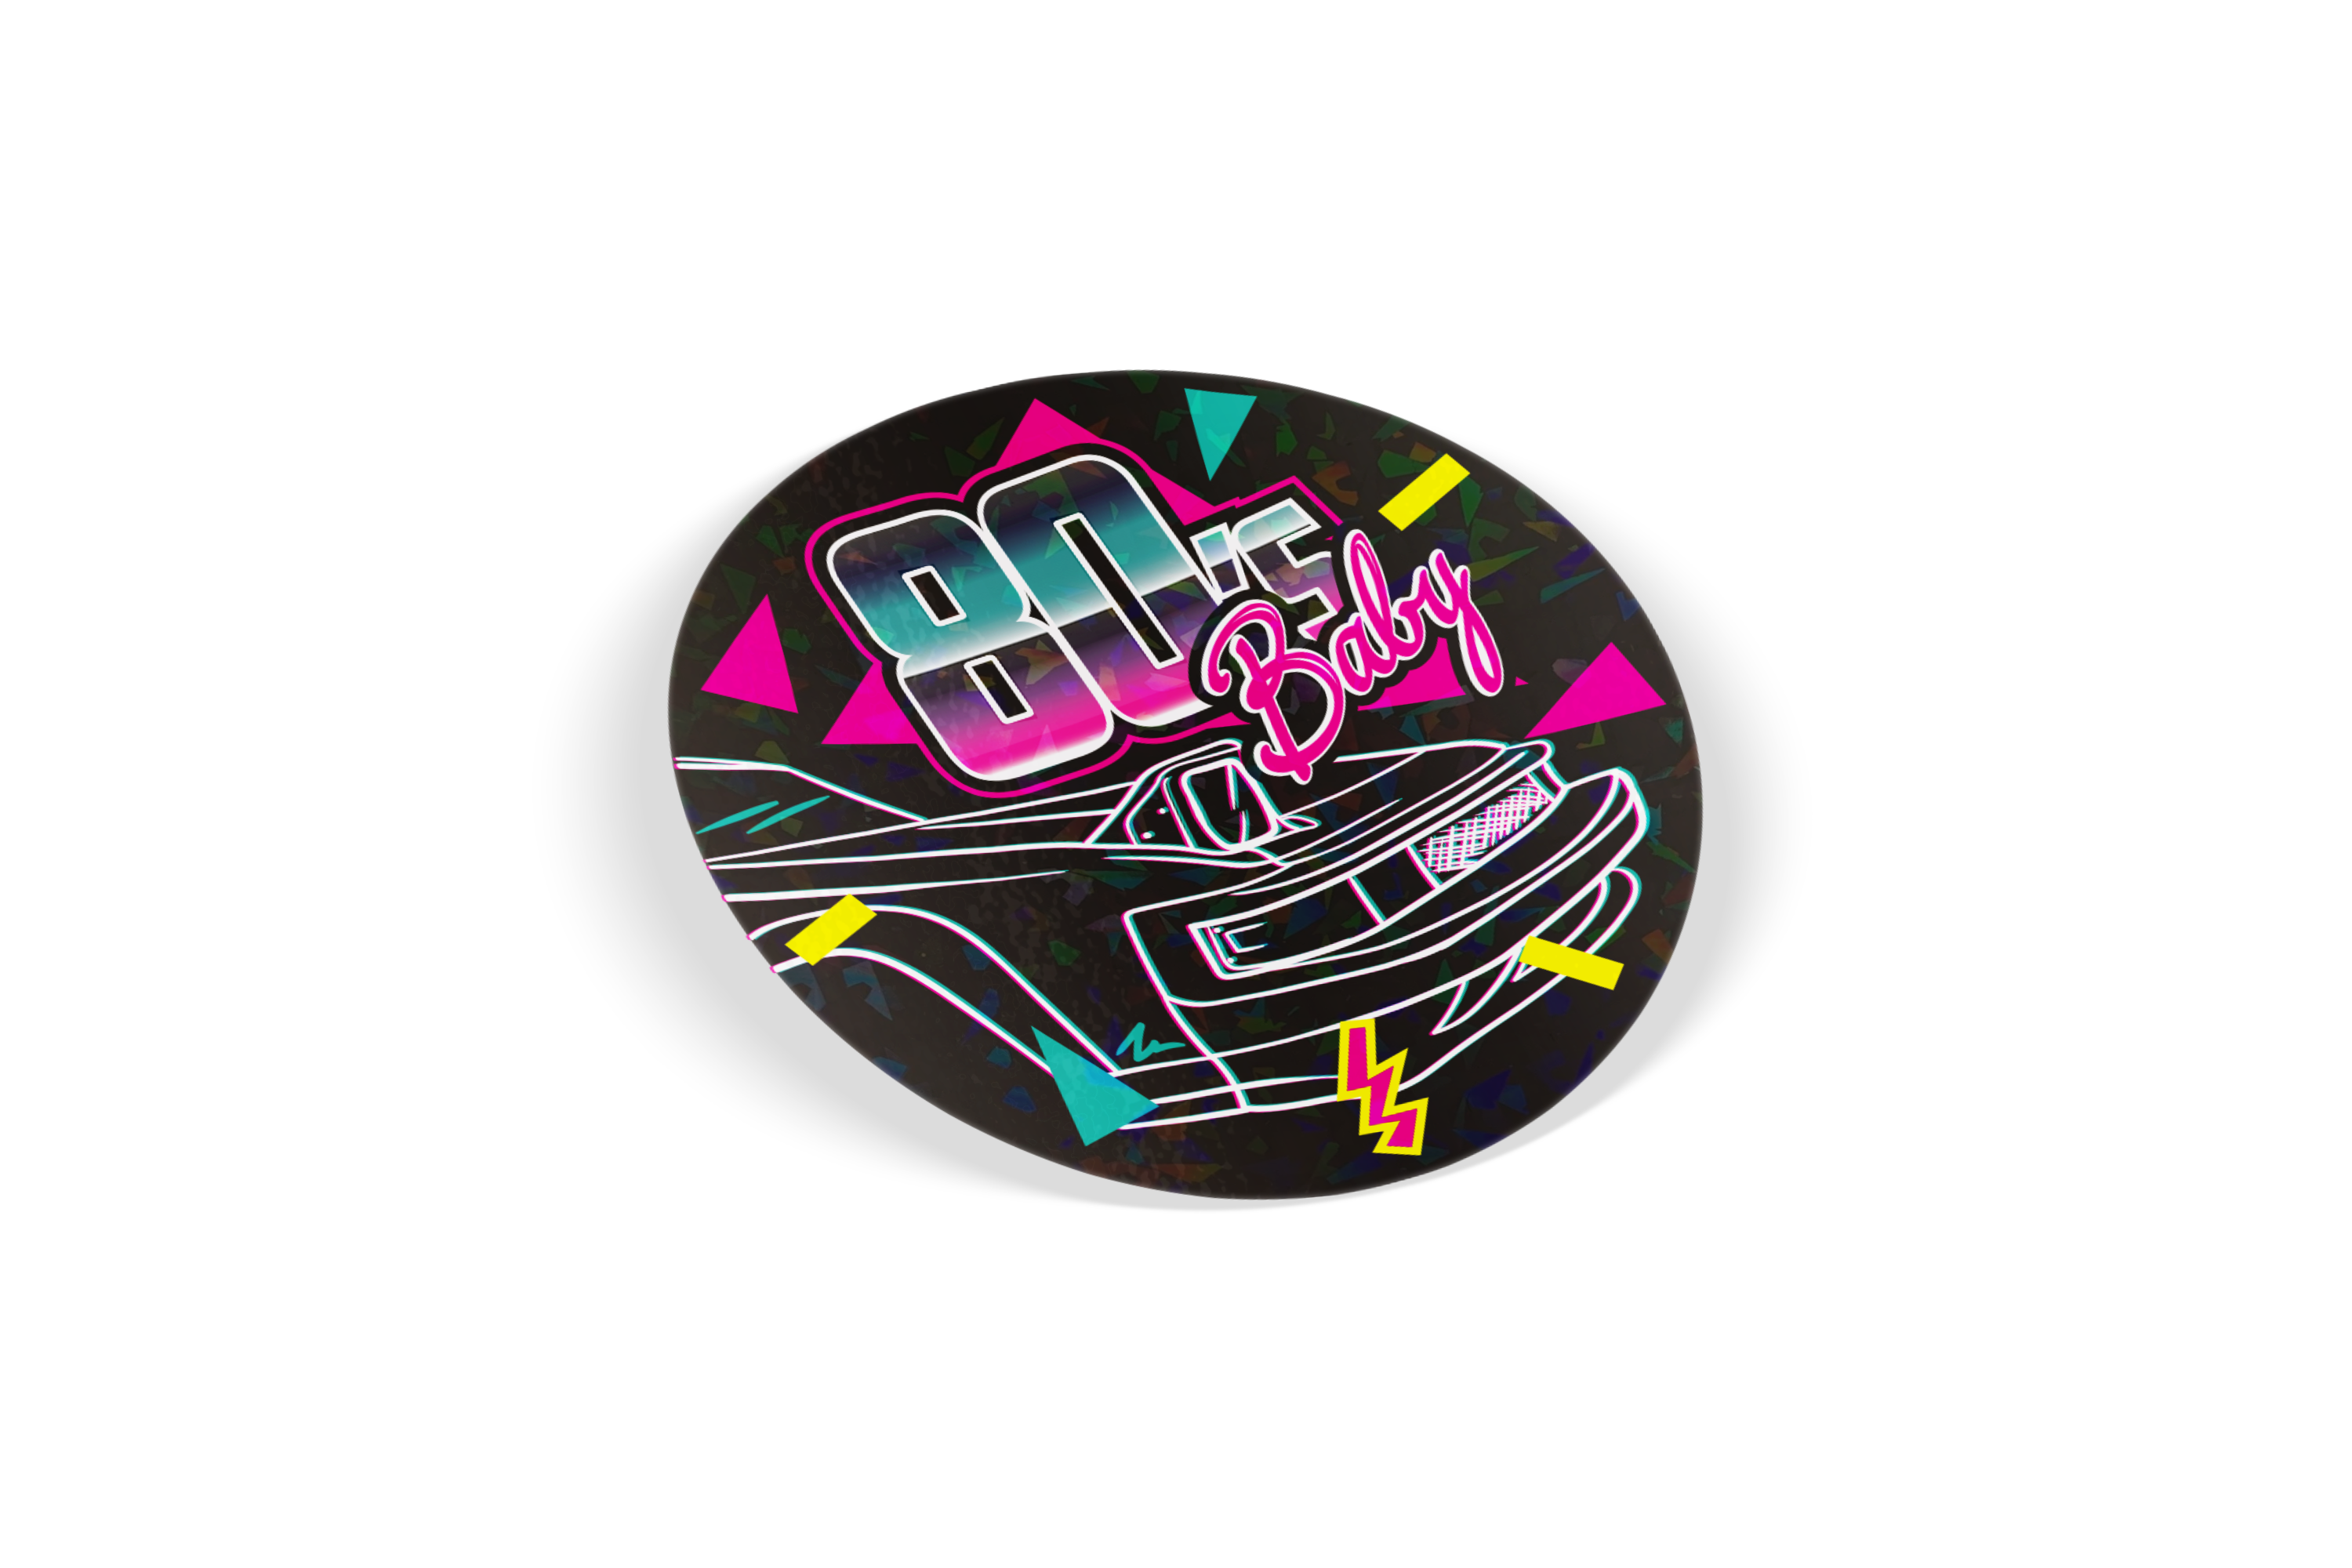 80s baby ma61 front - circle sticker flake holo  Drift bunny decals